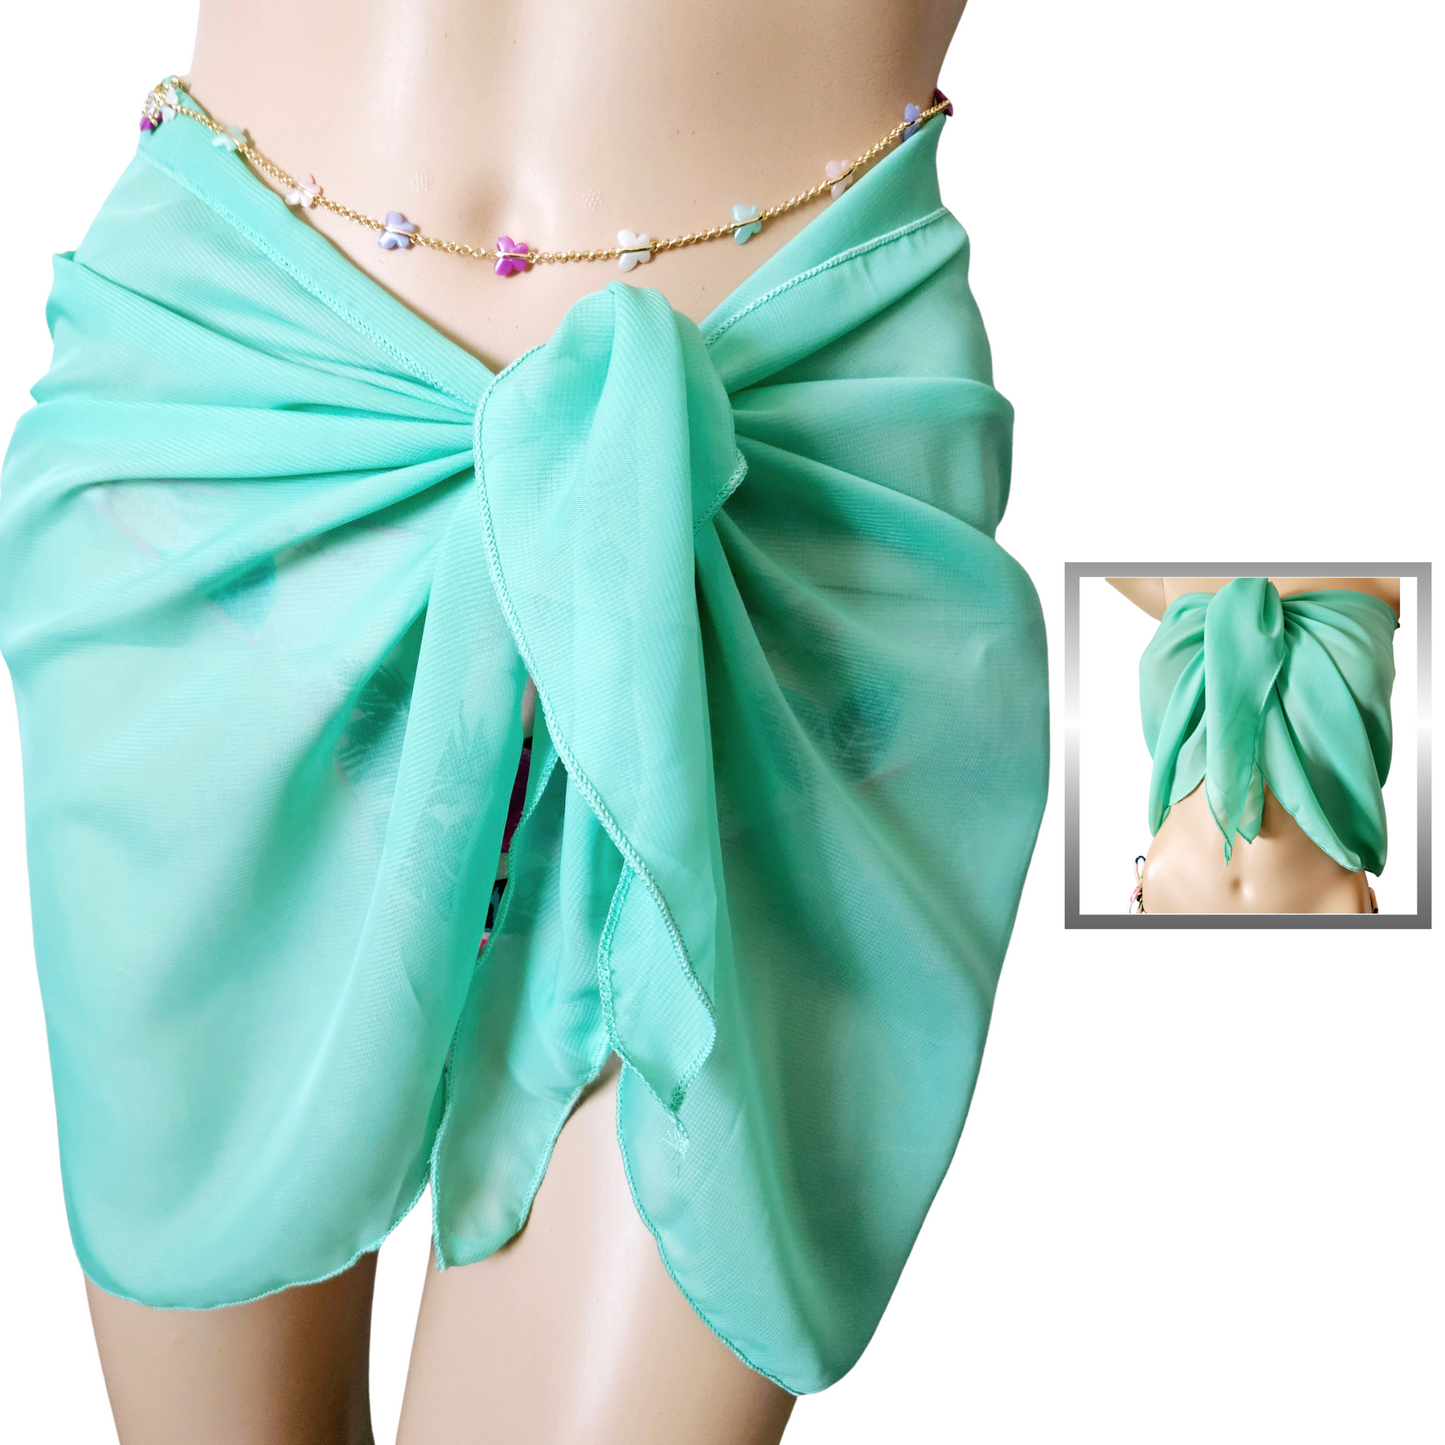 Green Women's Swimsuit Cover Up Sarong Cover-Ups Wrap Skirt